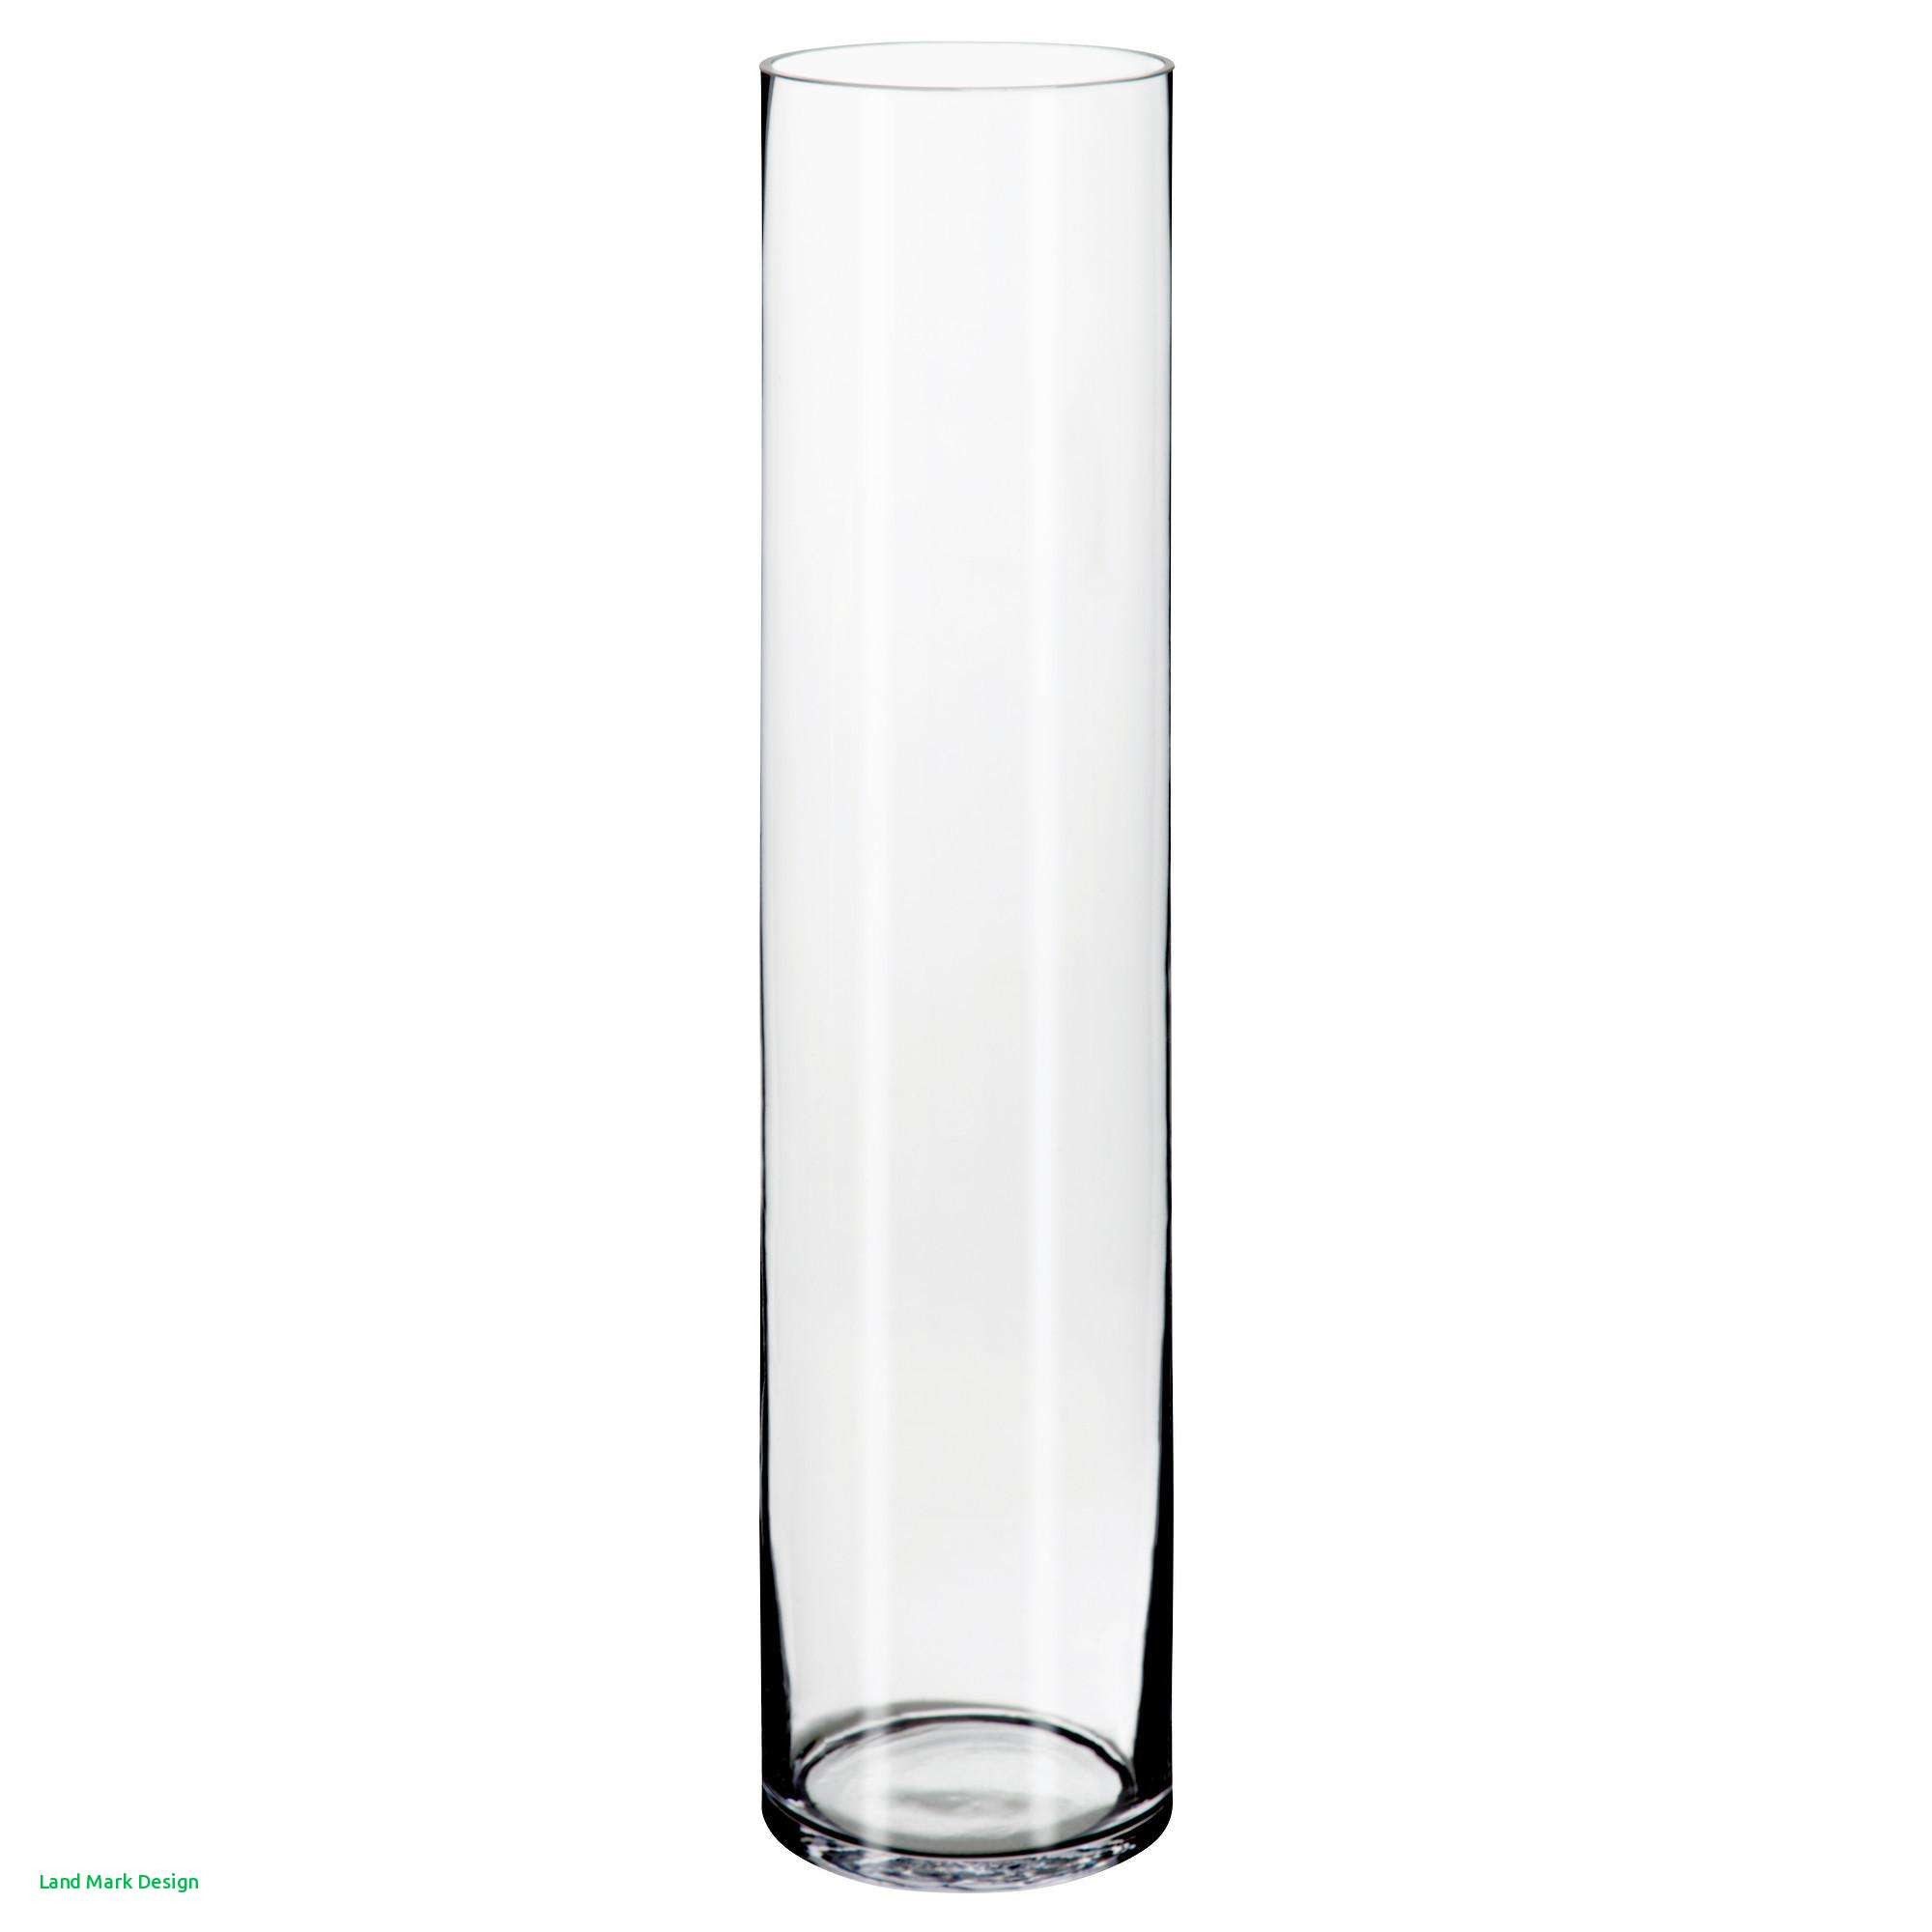 17 attractive Large Glass Vase with Stand 2022 free download large glass vase with stand of ikea floor vases design home design throughout full size of living room vase glass fresh pe s5h vases ikea floor vase i large